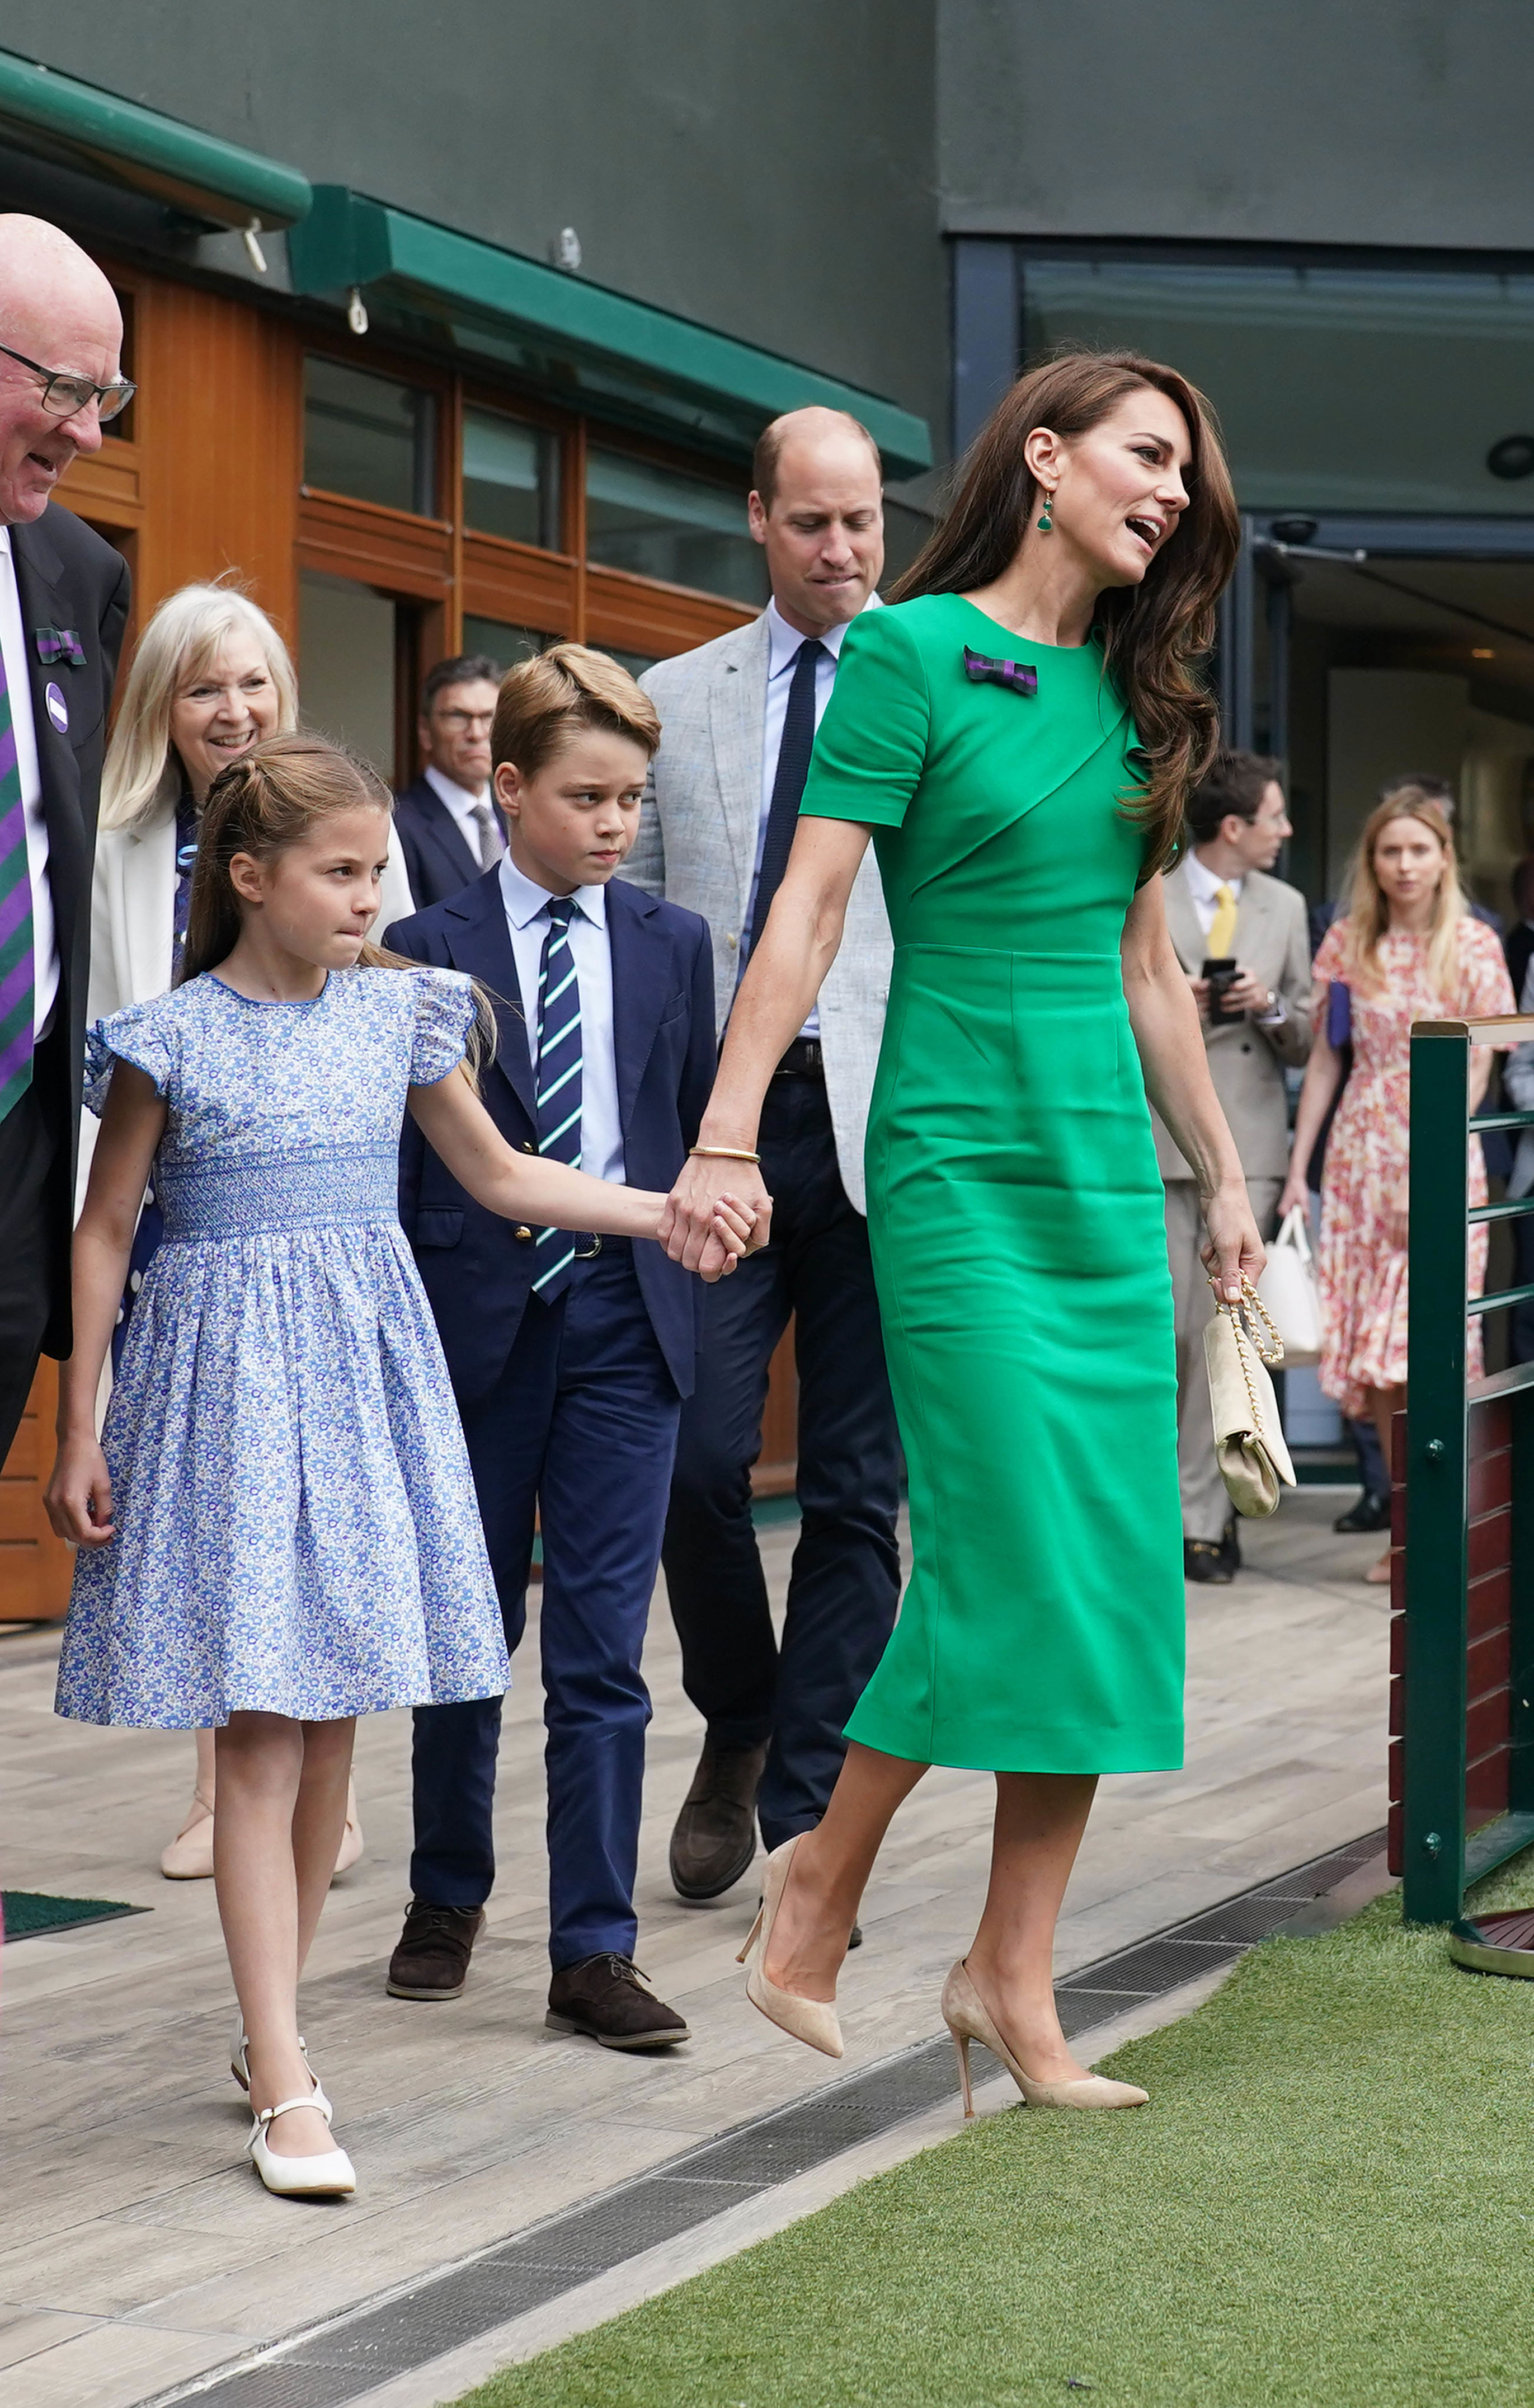 <p>Princess Charlotte and Prince George joined their parents, Princess Kate and Prince William, to watch the Men's Singles final match on day 14 of the <a href="https://www.wonderwall.com/celebrity/wimbledon-2023-the-best-pictures-of-royals-and-stars-at-the-tennis-championships-758994.gallery">Wimbledon Tennis Championships</a> at the All England Lawn Tennis and Croquet Club in London on July 16, 2023.</p>